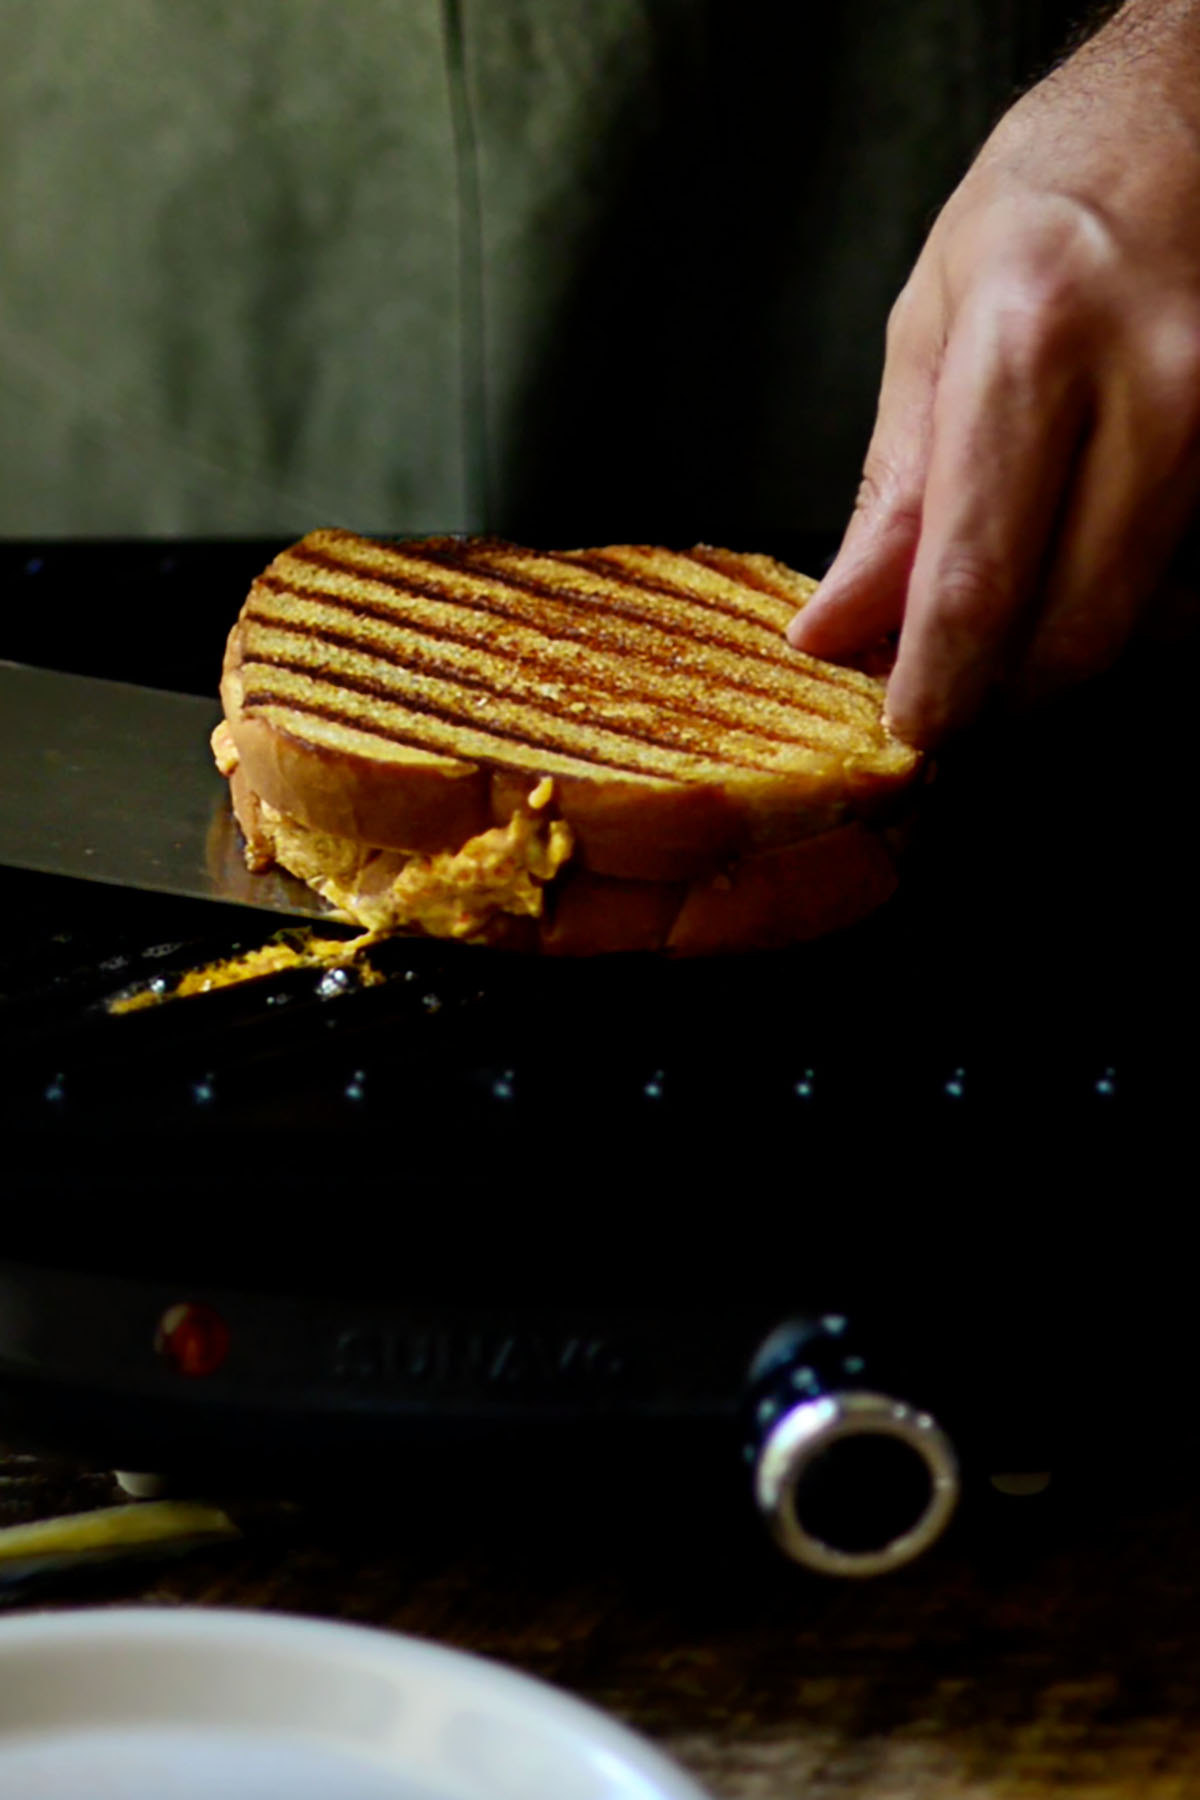 A grilled cheese sandwich being flipped over on a cast iron griddle showing the grill marks.